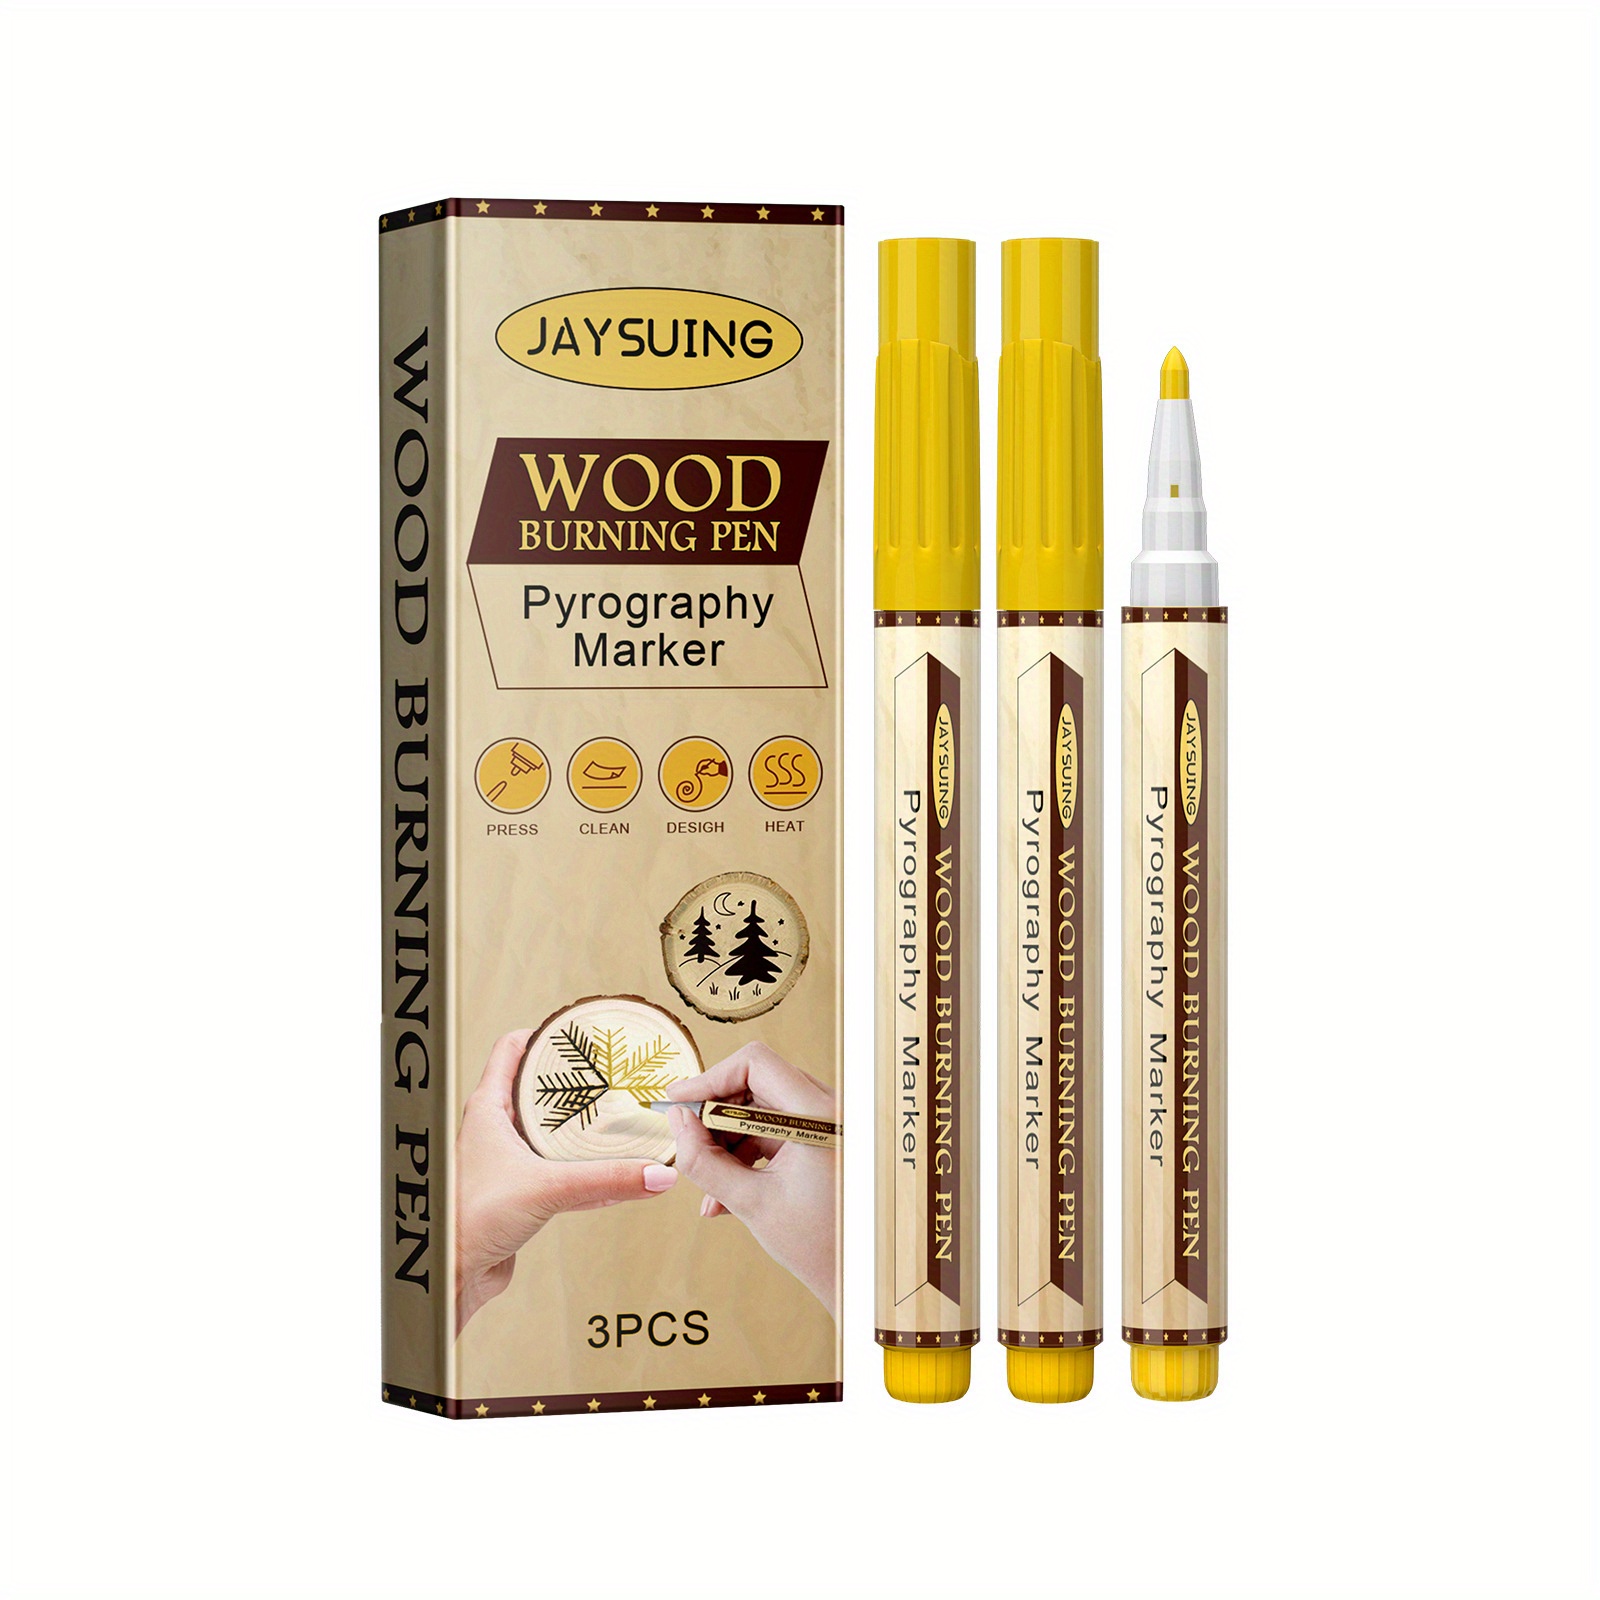 

Jaysuing Wood Burning Marker Pen - Diy Craft & Art Design Tool For Coasters, Cutting Boards & More, Ages 14+